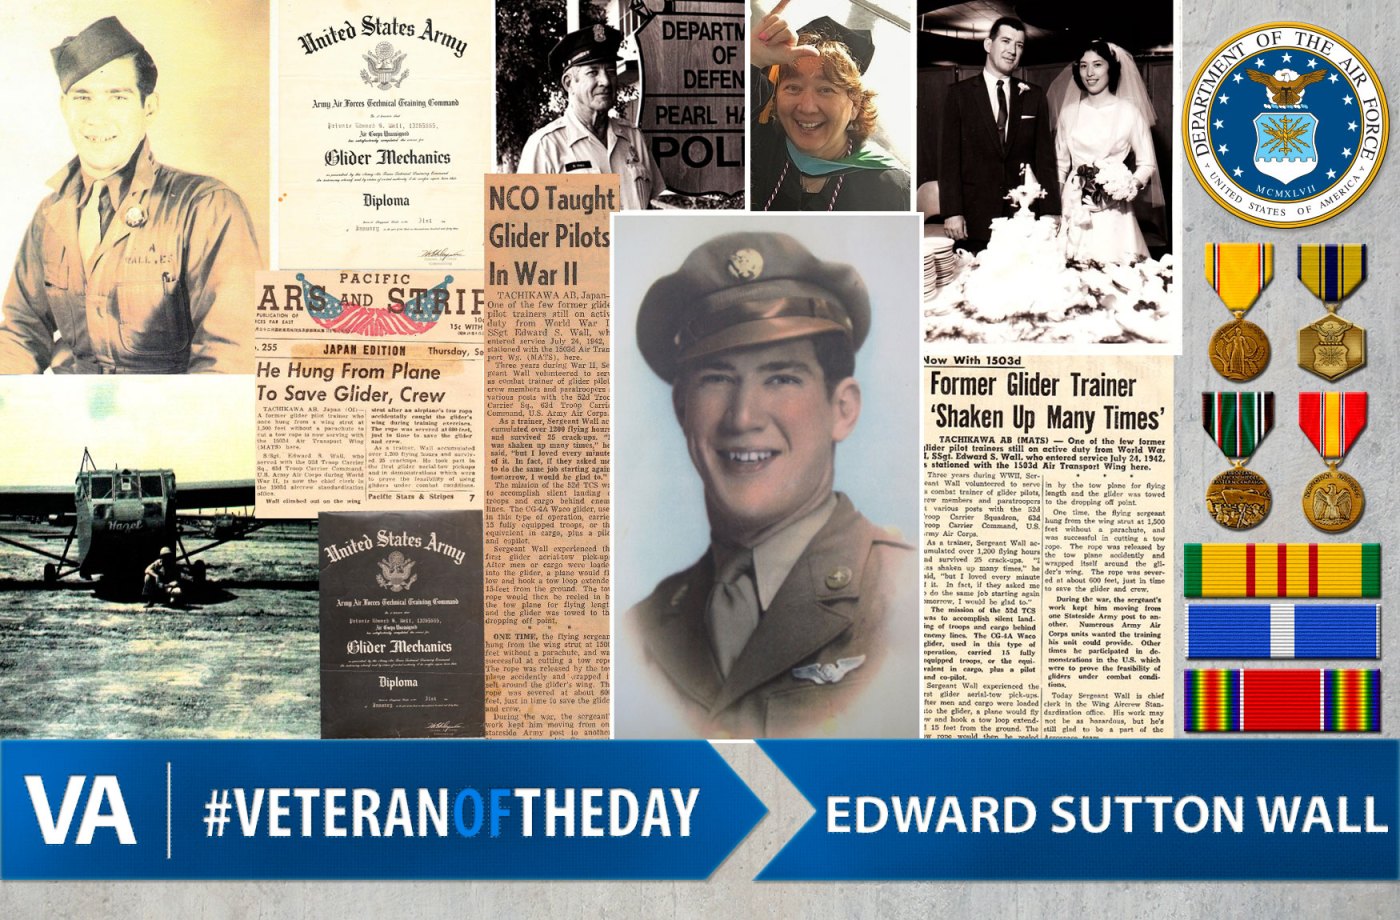 Veteran of the day Edward Sutton Wall